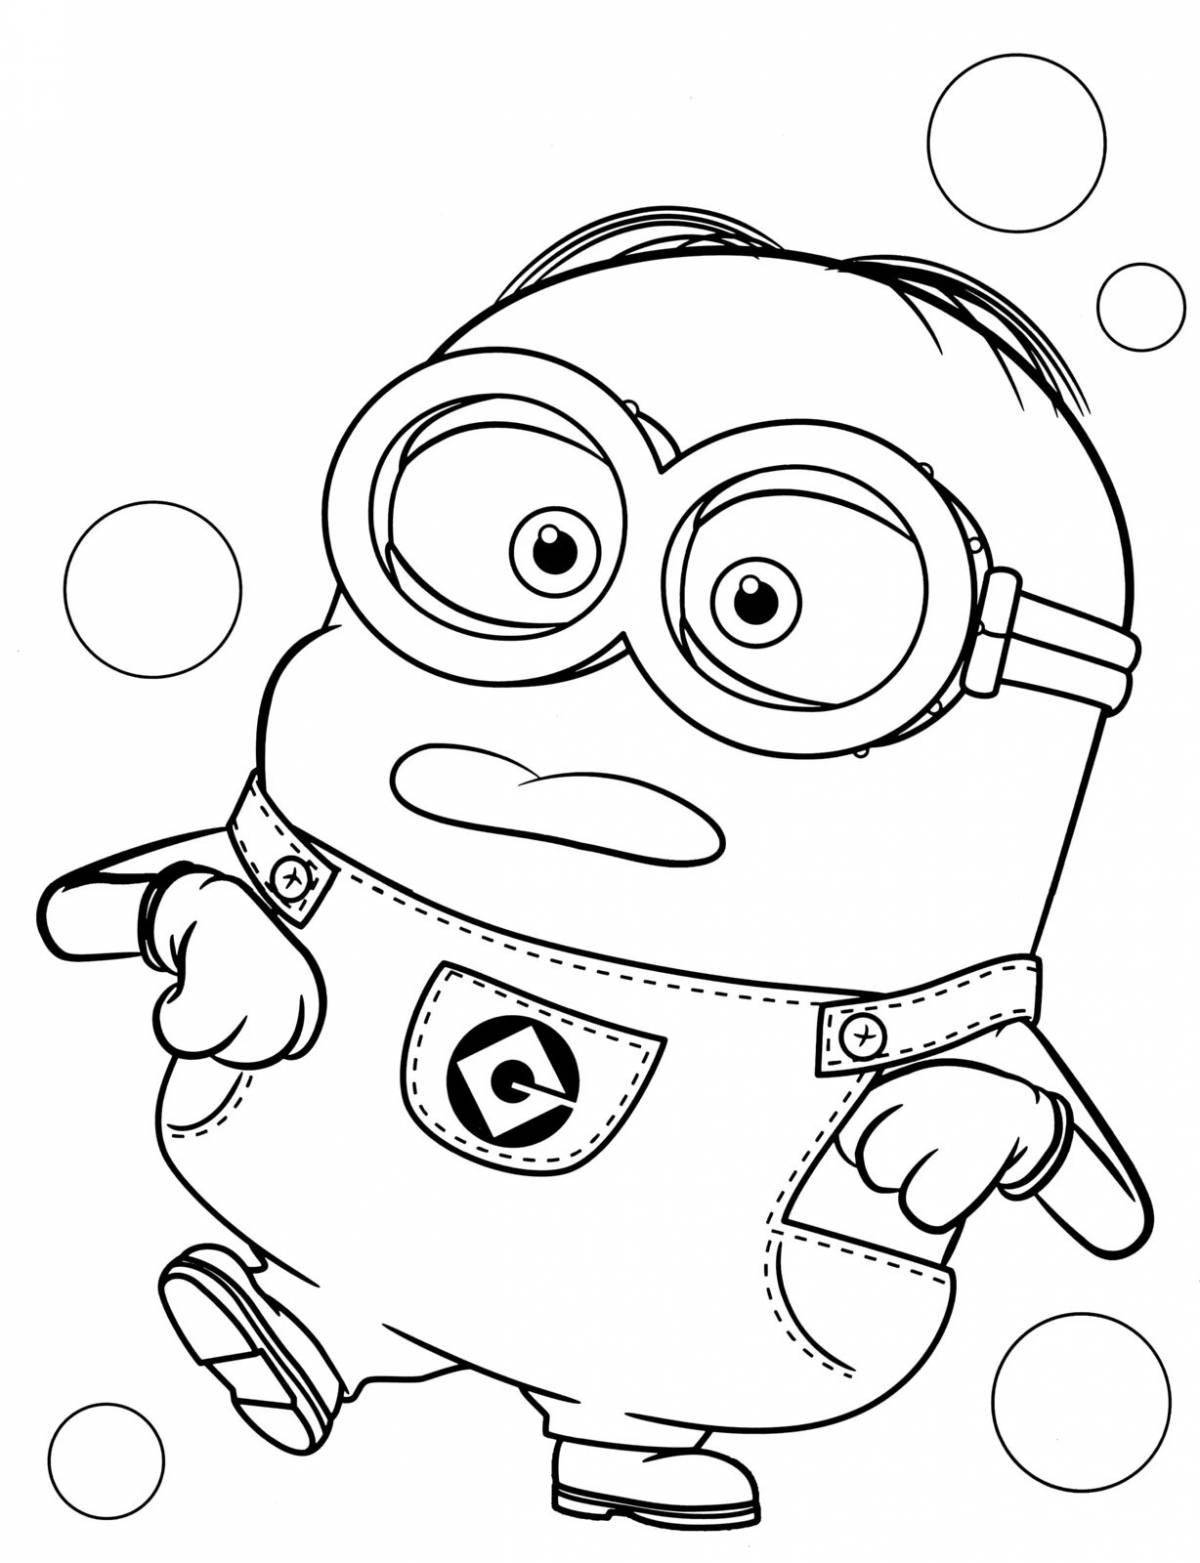 Color explosion minion christmas coloring book